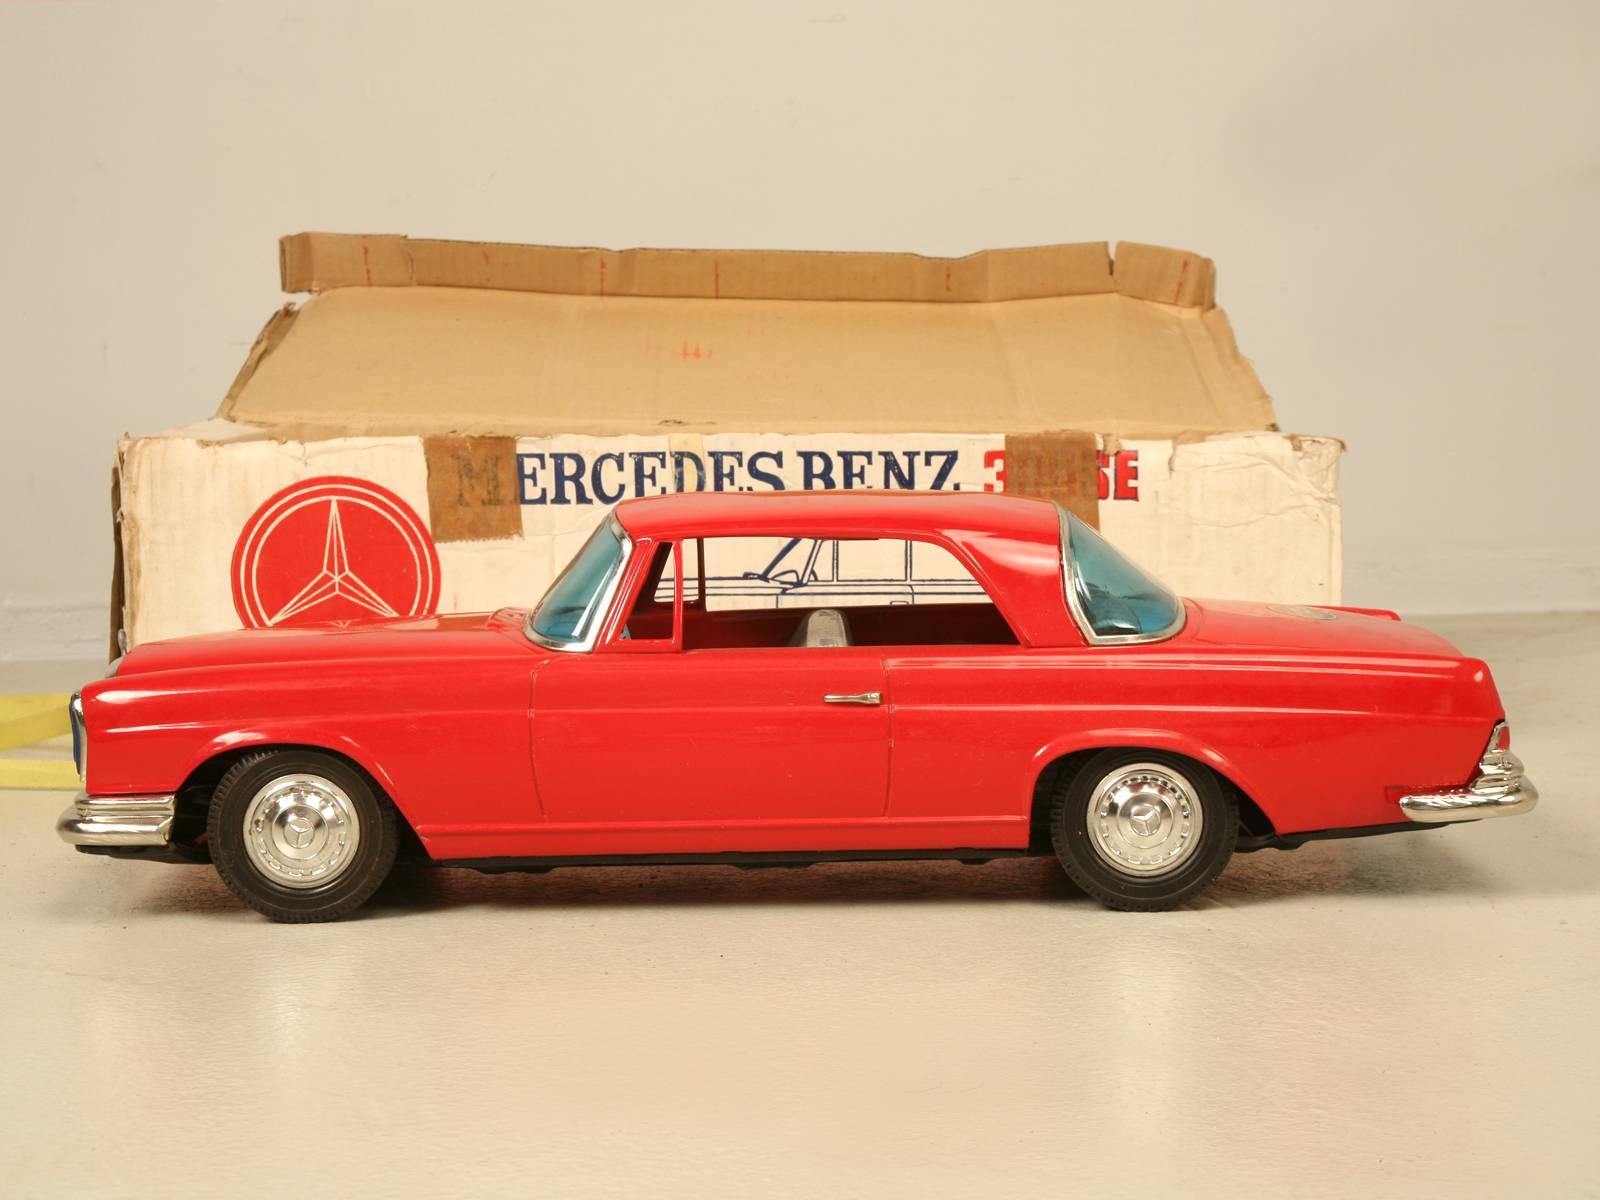 Mid-1960s huge Ichiko Mercedes-Benz 300SE coupe made in Japan with its original box, which to serious collectors is worth about the same as the car. This particular toy appears to have never been played with and remains in virtually NOS (new old